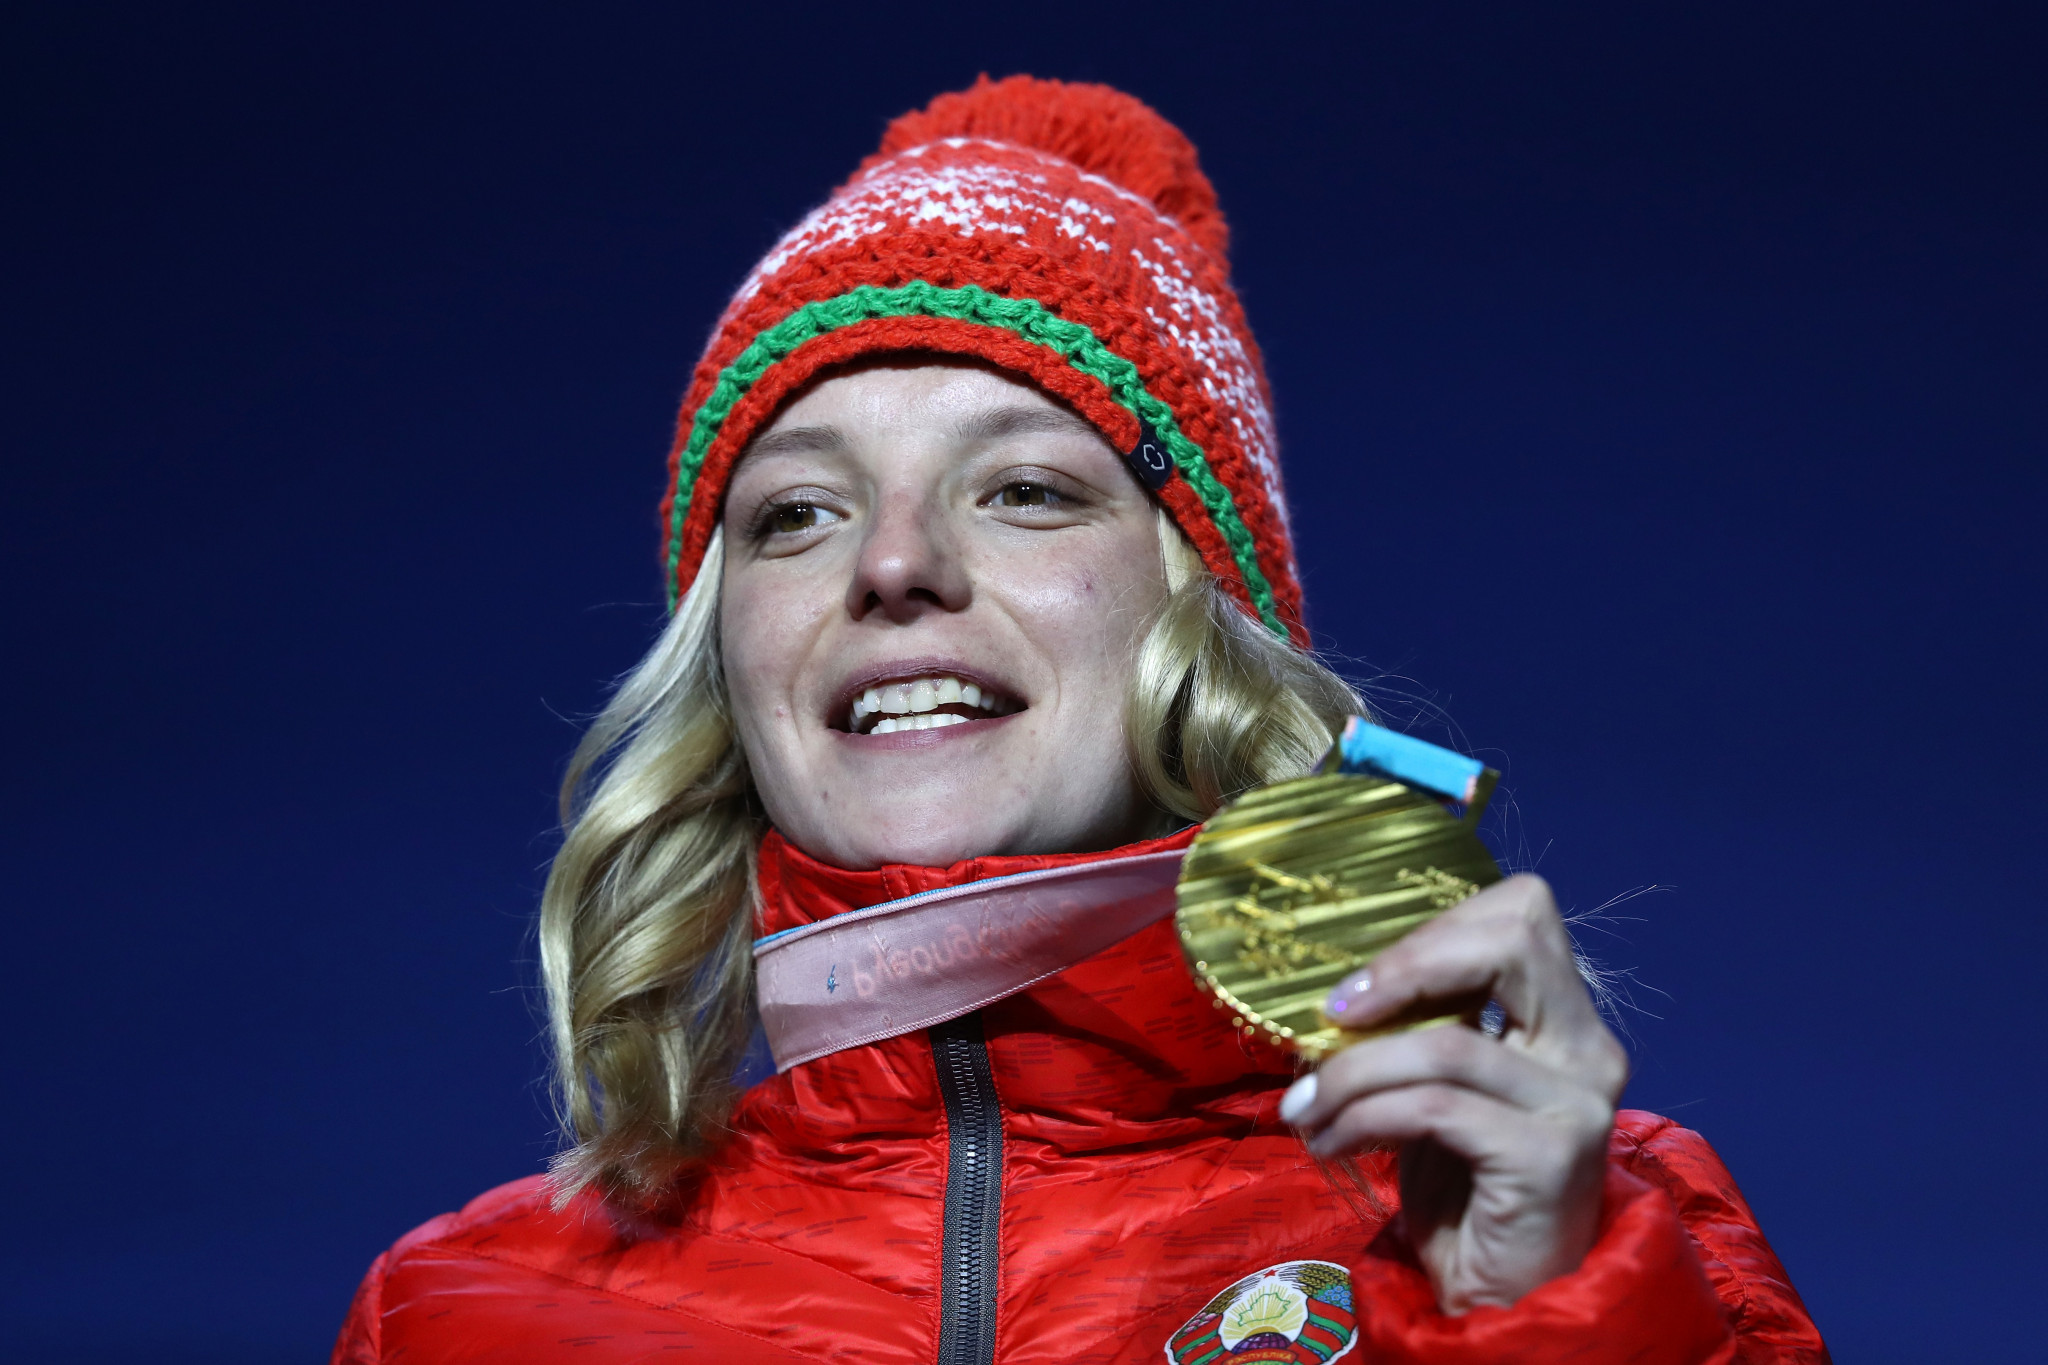 Olympic aerials champion Hanna Huskova won last time out in Moscow to take her first World Cup win of the season ©Getty Images